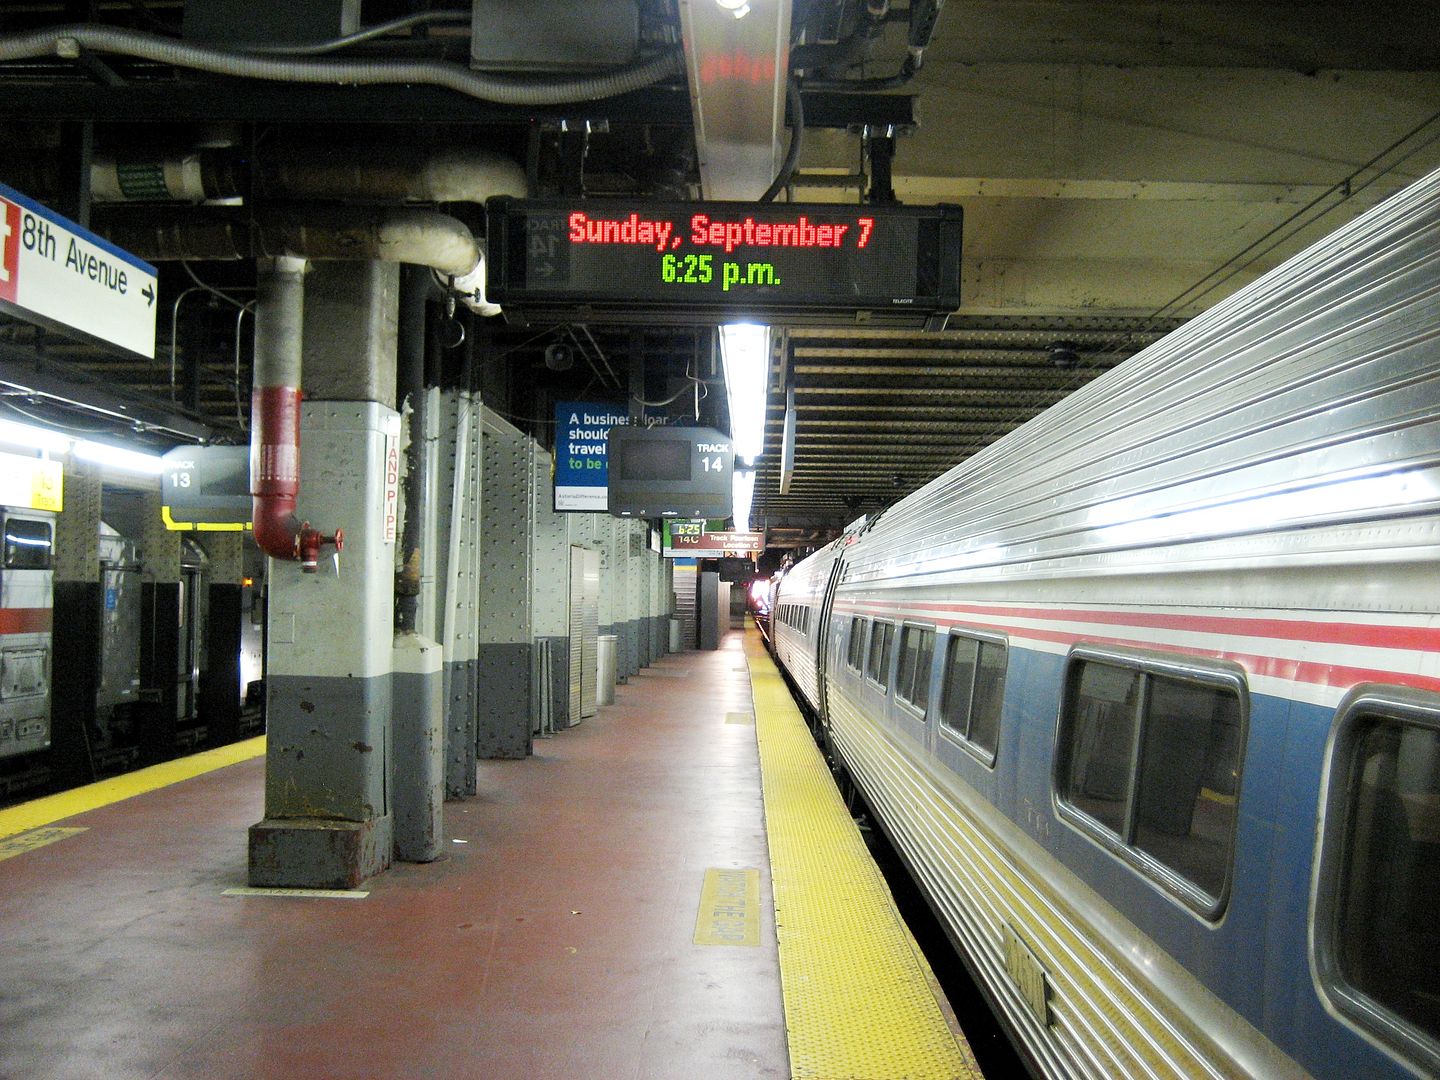 Long view of our train at Penn Station.